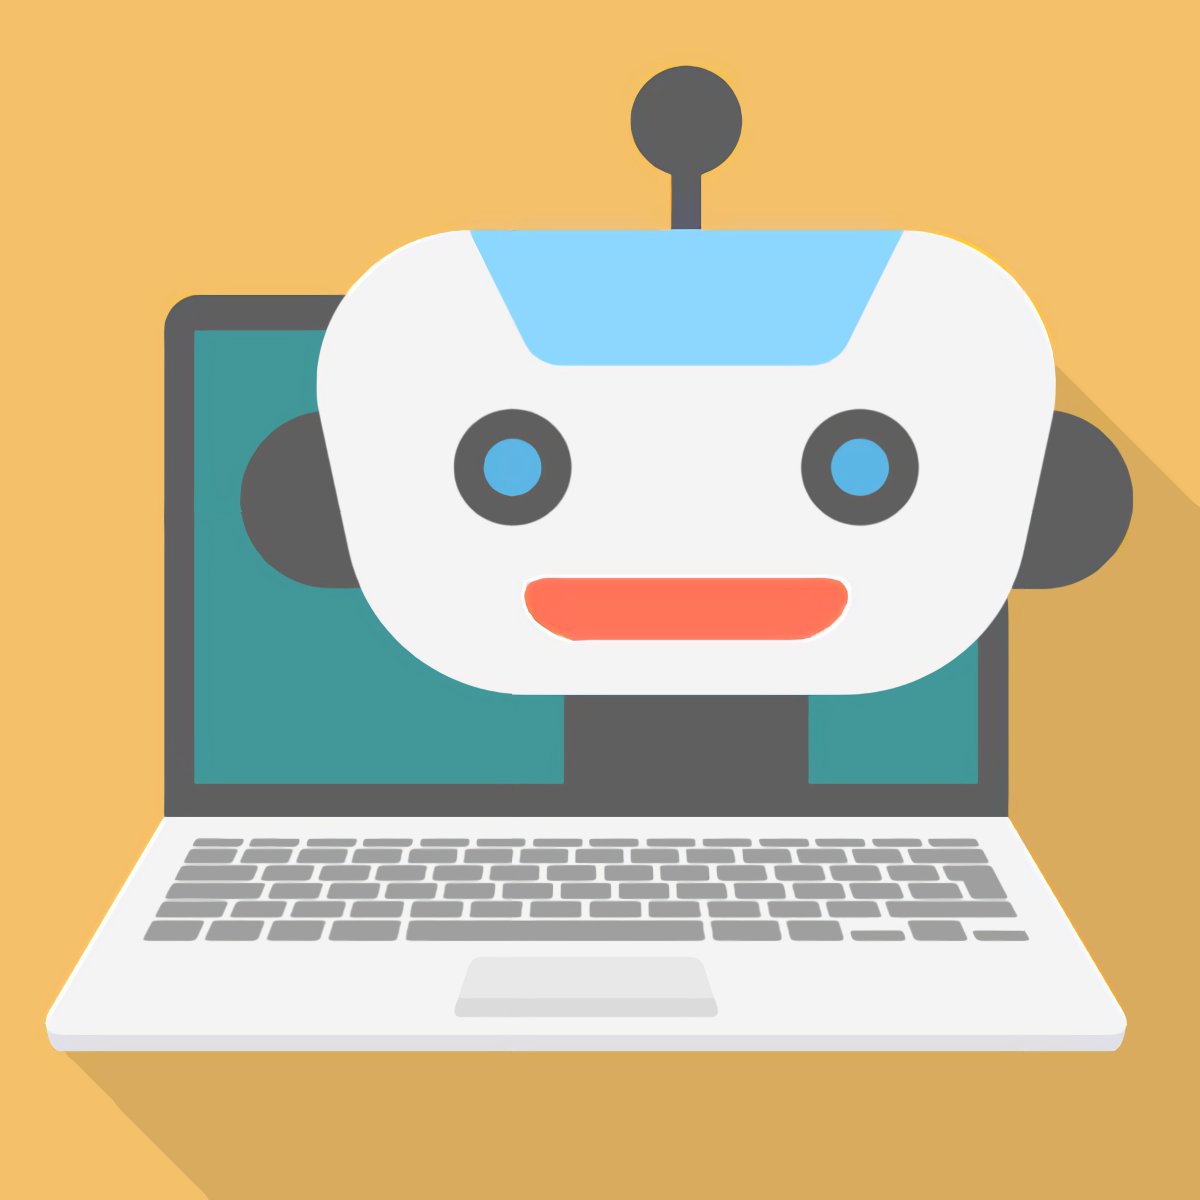 Learn the pros and cons of using free AI tools for marketing → hubs.ly/Q01B6Whz0

#AIMarketingTools #DigitalMarketing #DigitalMarketingTips